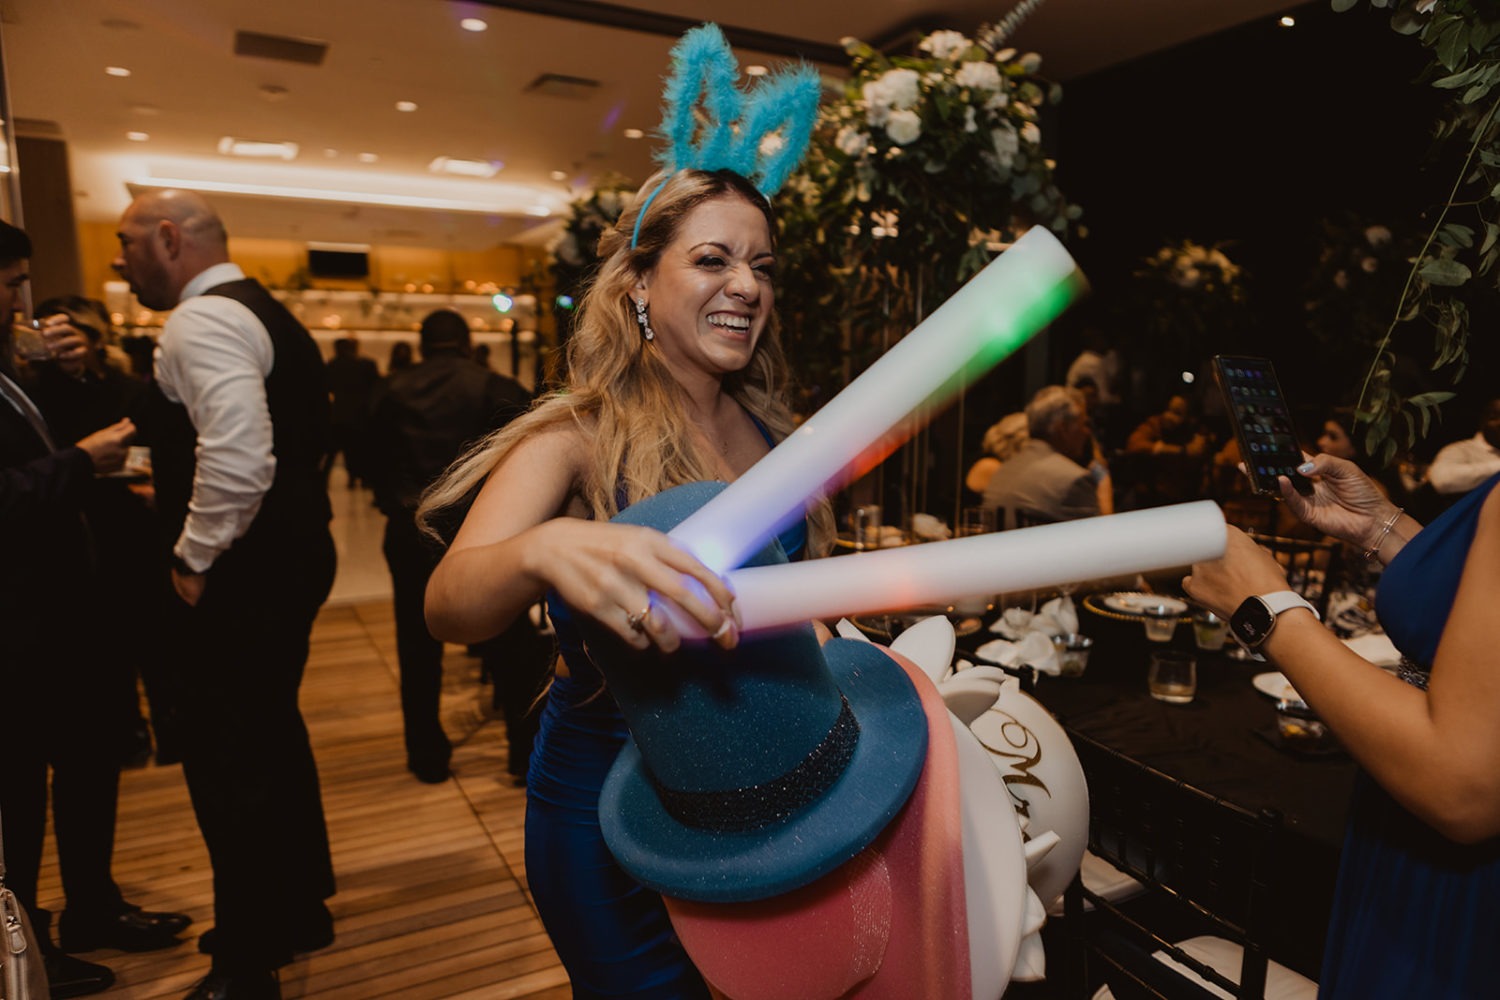 guest hands out glow sticks and hats at wedding reception dance party